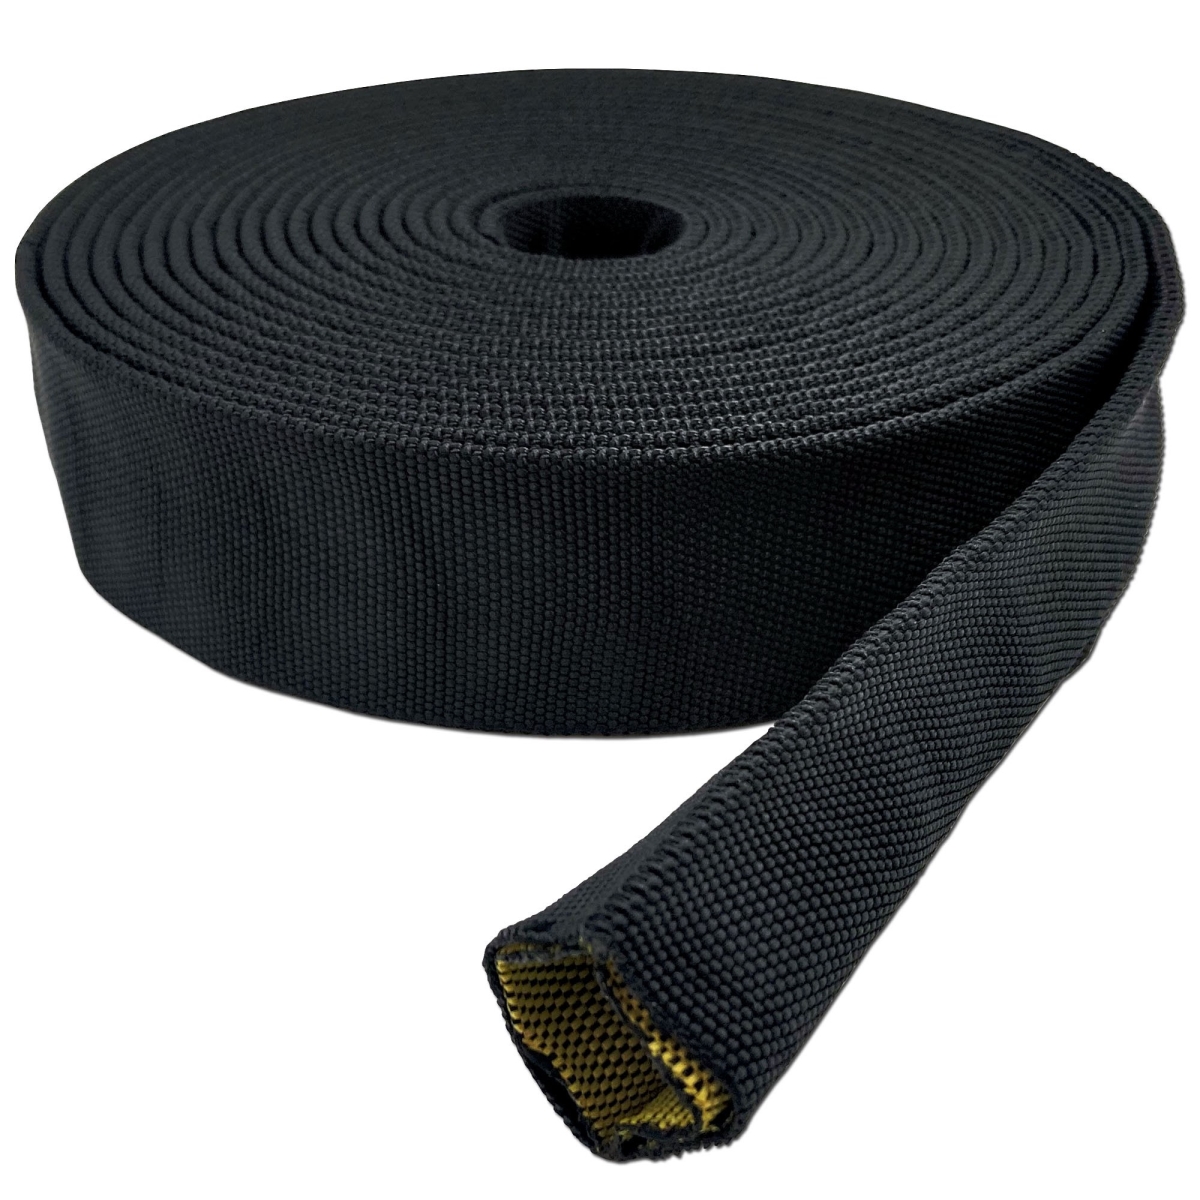 Picture of Electriduct BS-J-BURST-350-10-BK 3.5 in. x 10 ft. Burst Protection Multifilament Nylon Braided Sleeving - Black